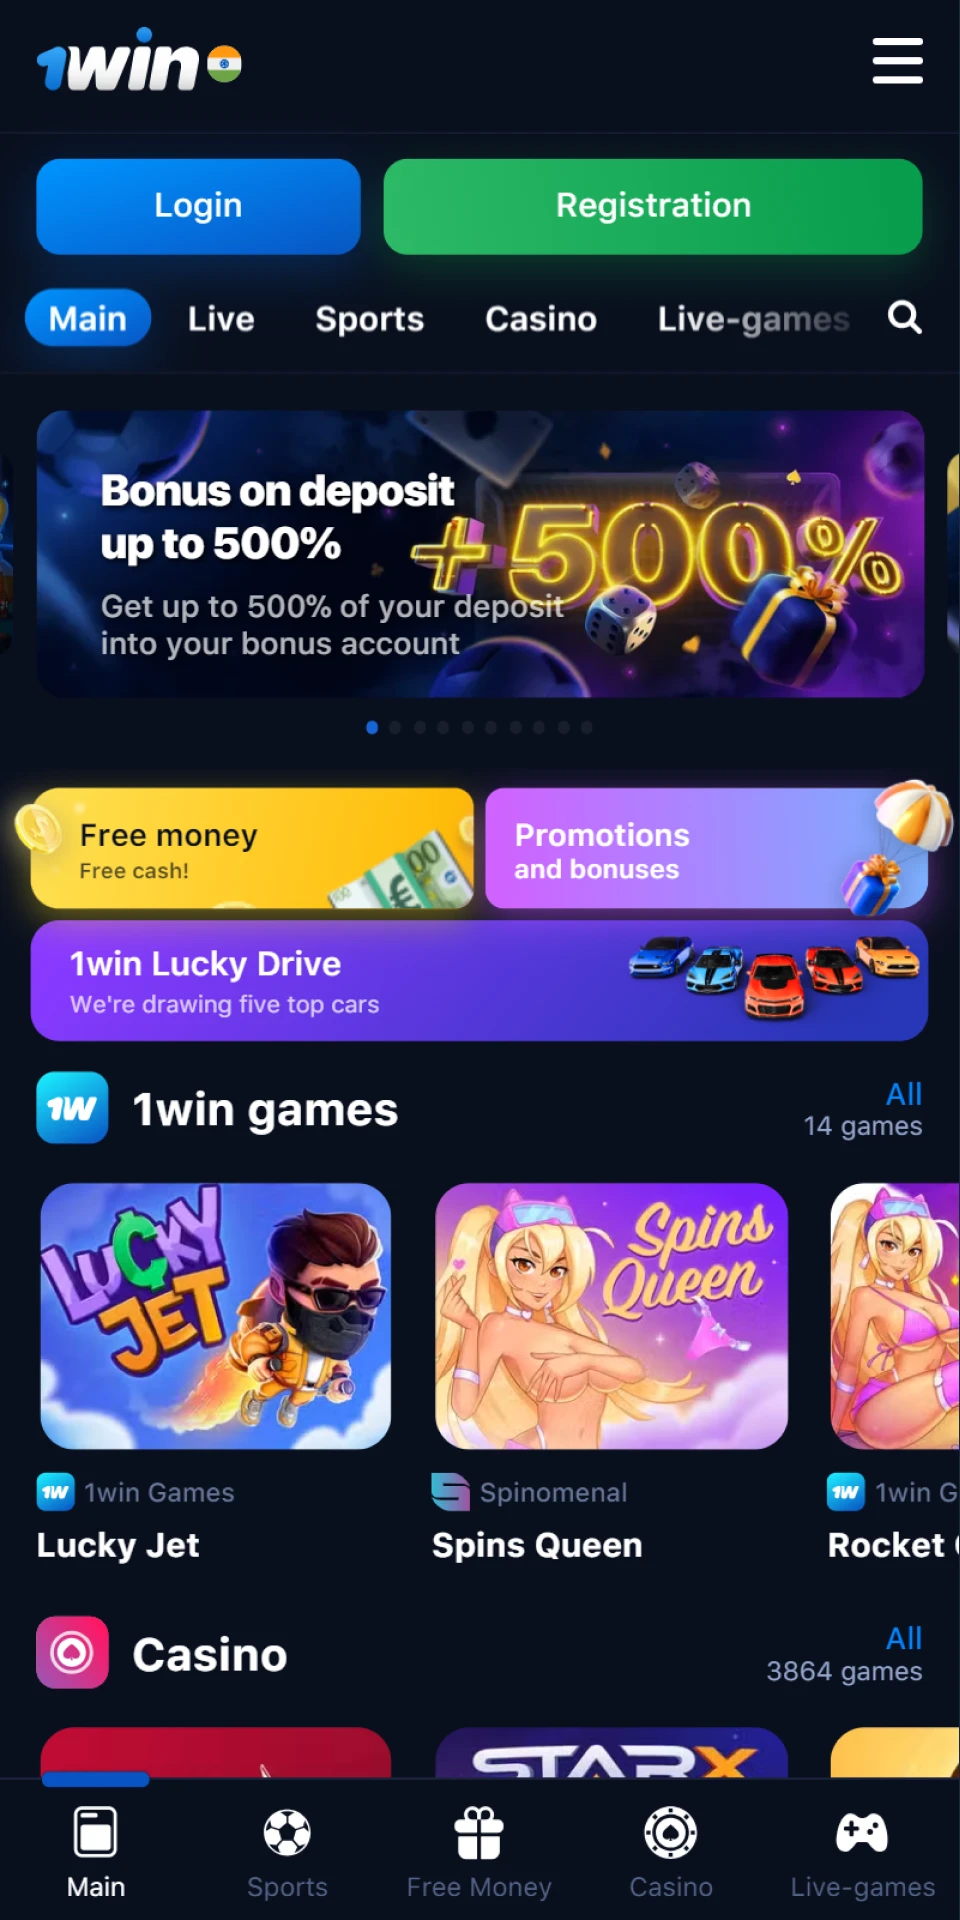 1Win has an application with large sports and casino sections.